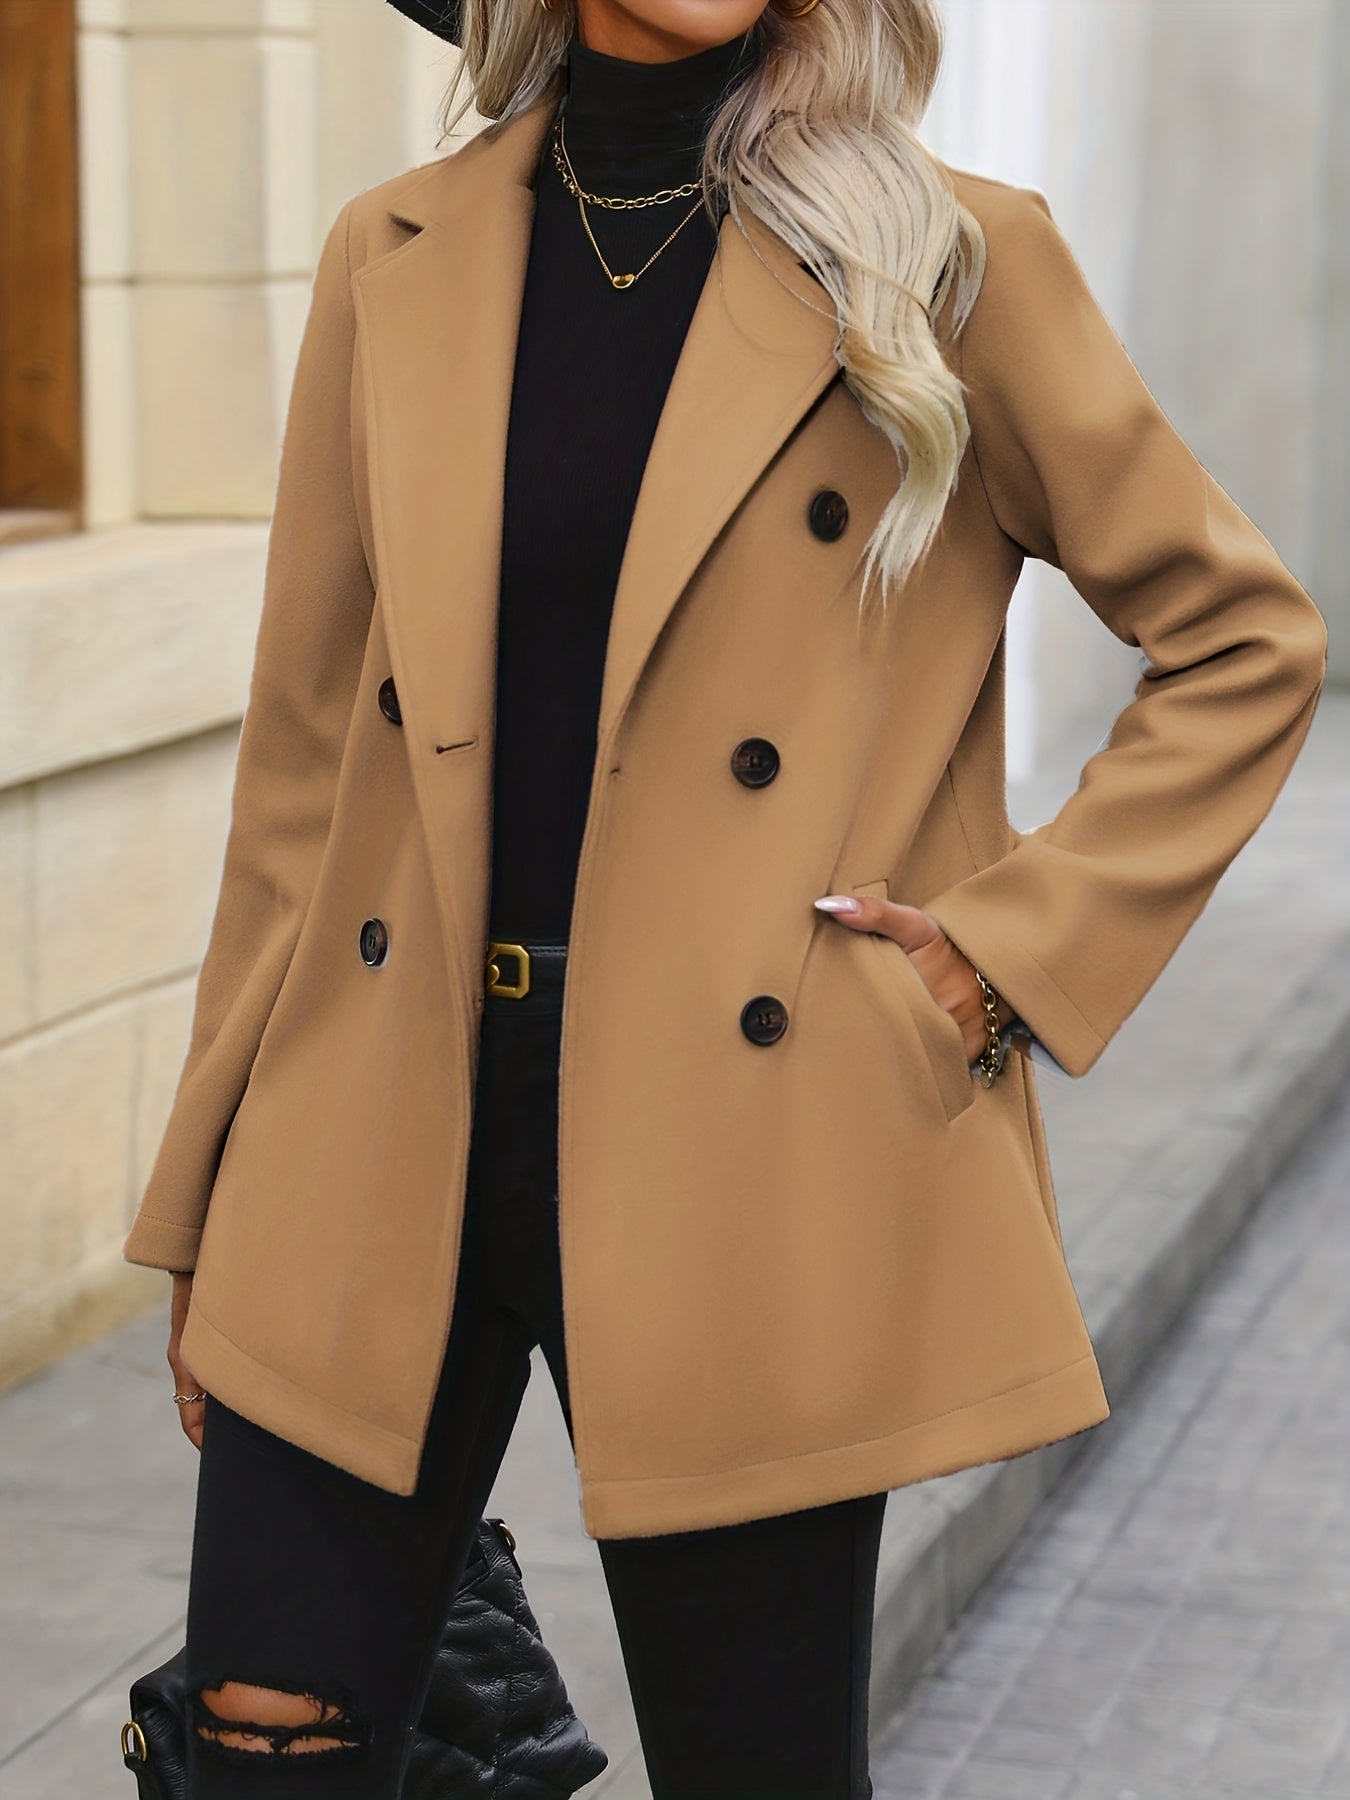 Double Breasted Lapel Bean Coat, Elegant Long Sleeve Outerwear With Pockets, Women's Clothing